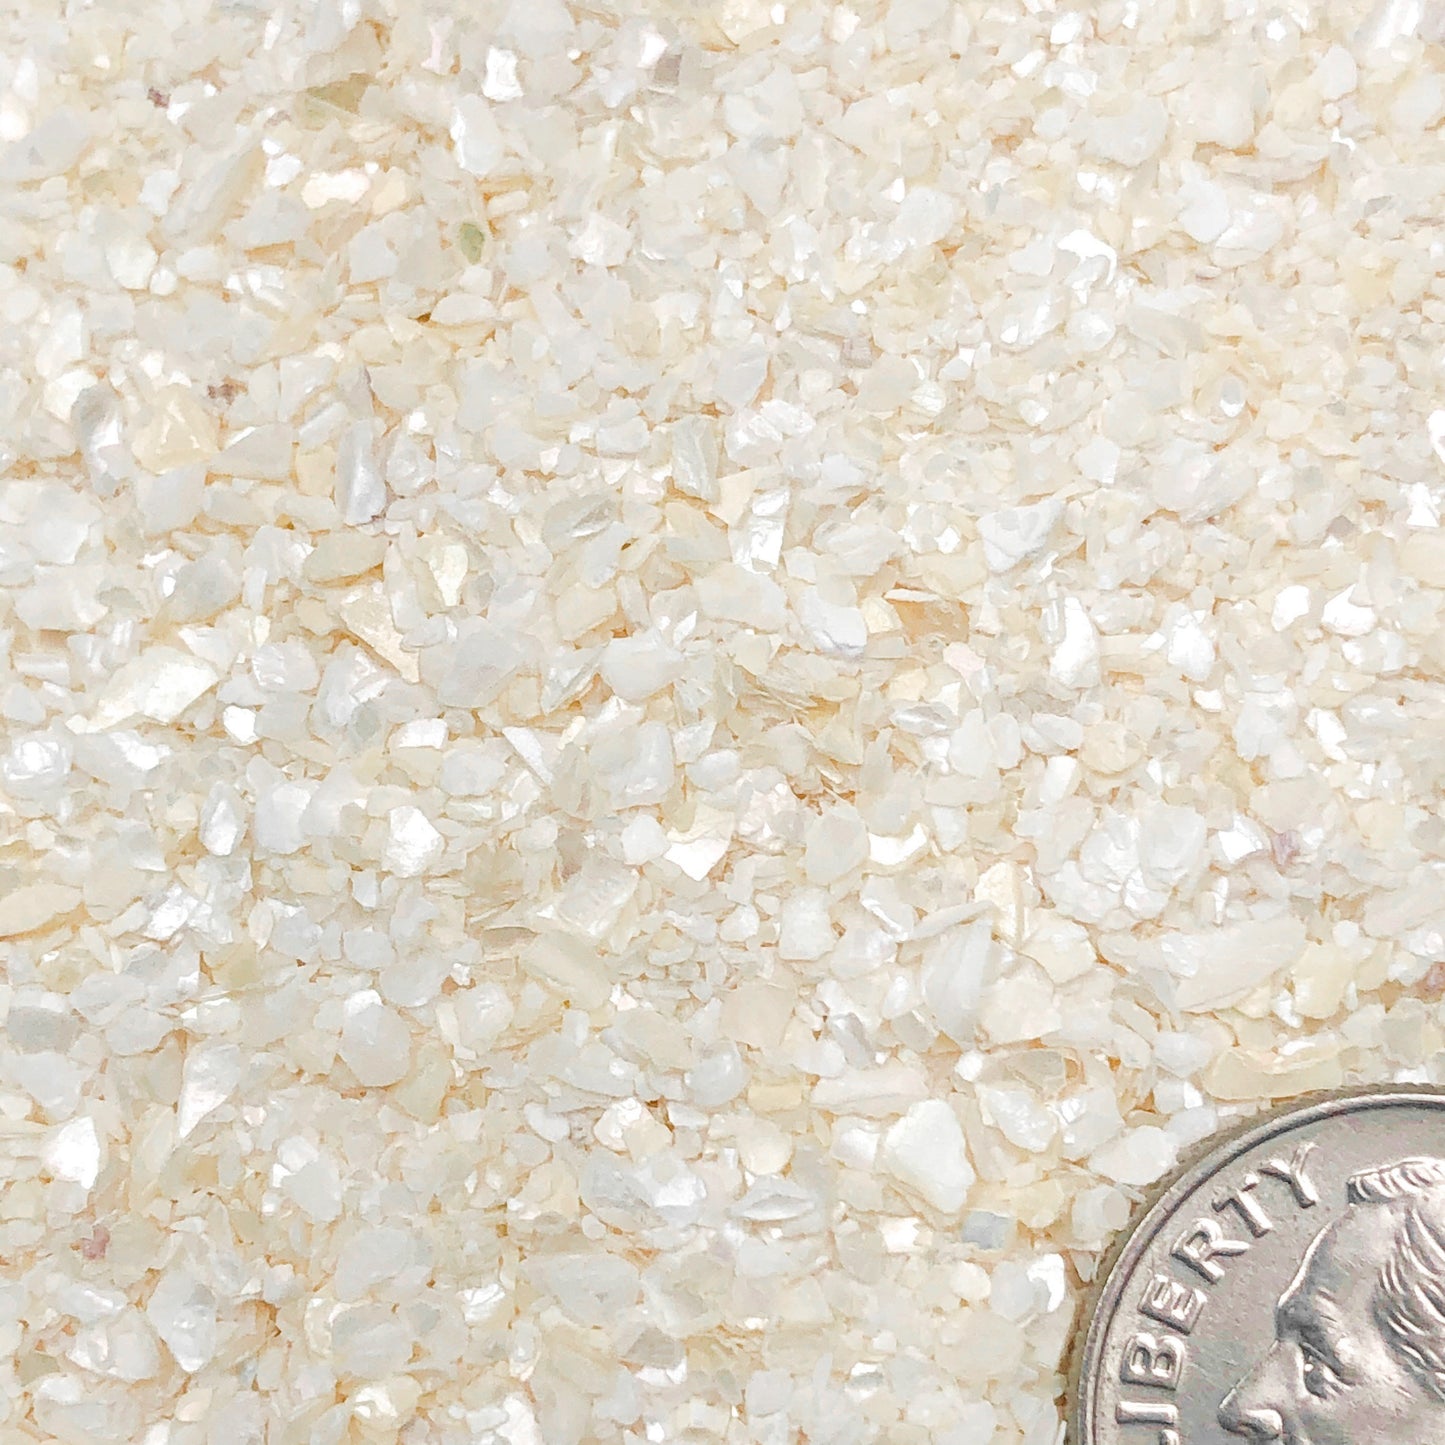 Crushed Creamy White Mother of Pearl, Medium Crush, Sand Size, 2mm - 0.25mm